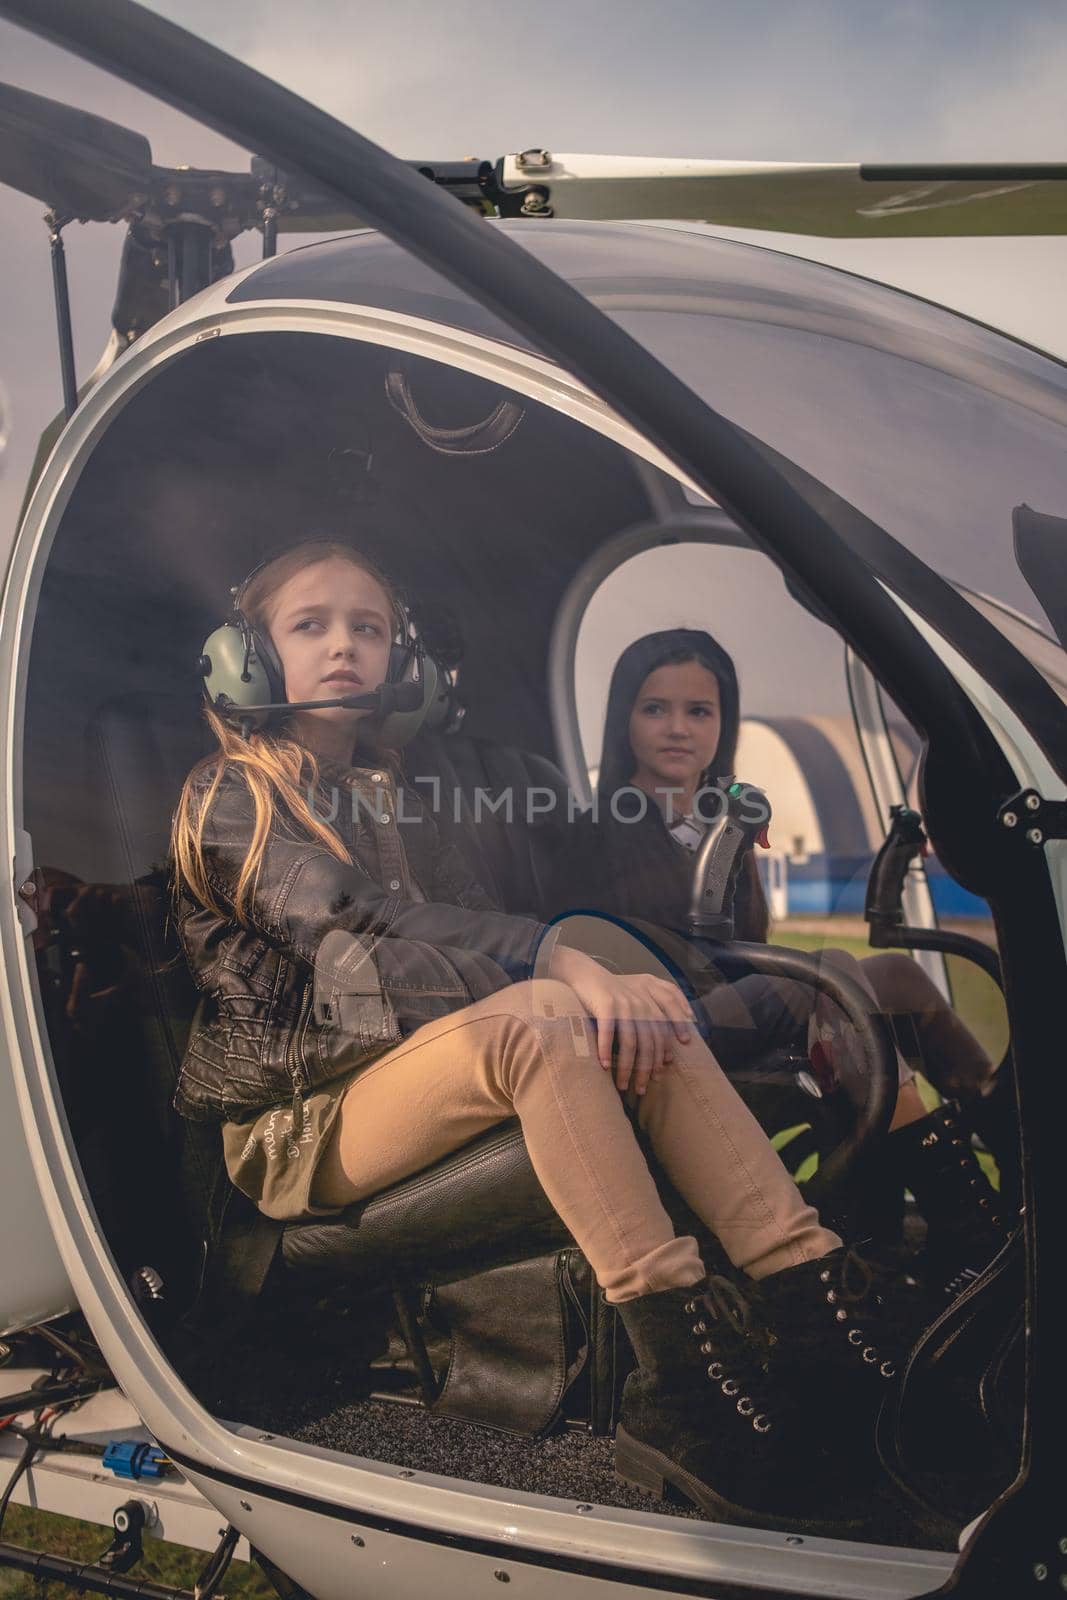 Two dreamy tween girls sitting on pilot seats in cockpit of modern helicopter landed at flying field, looking into distance